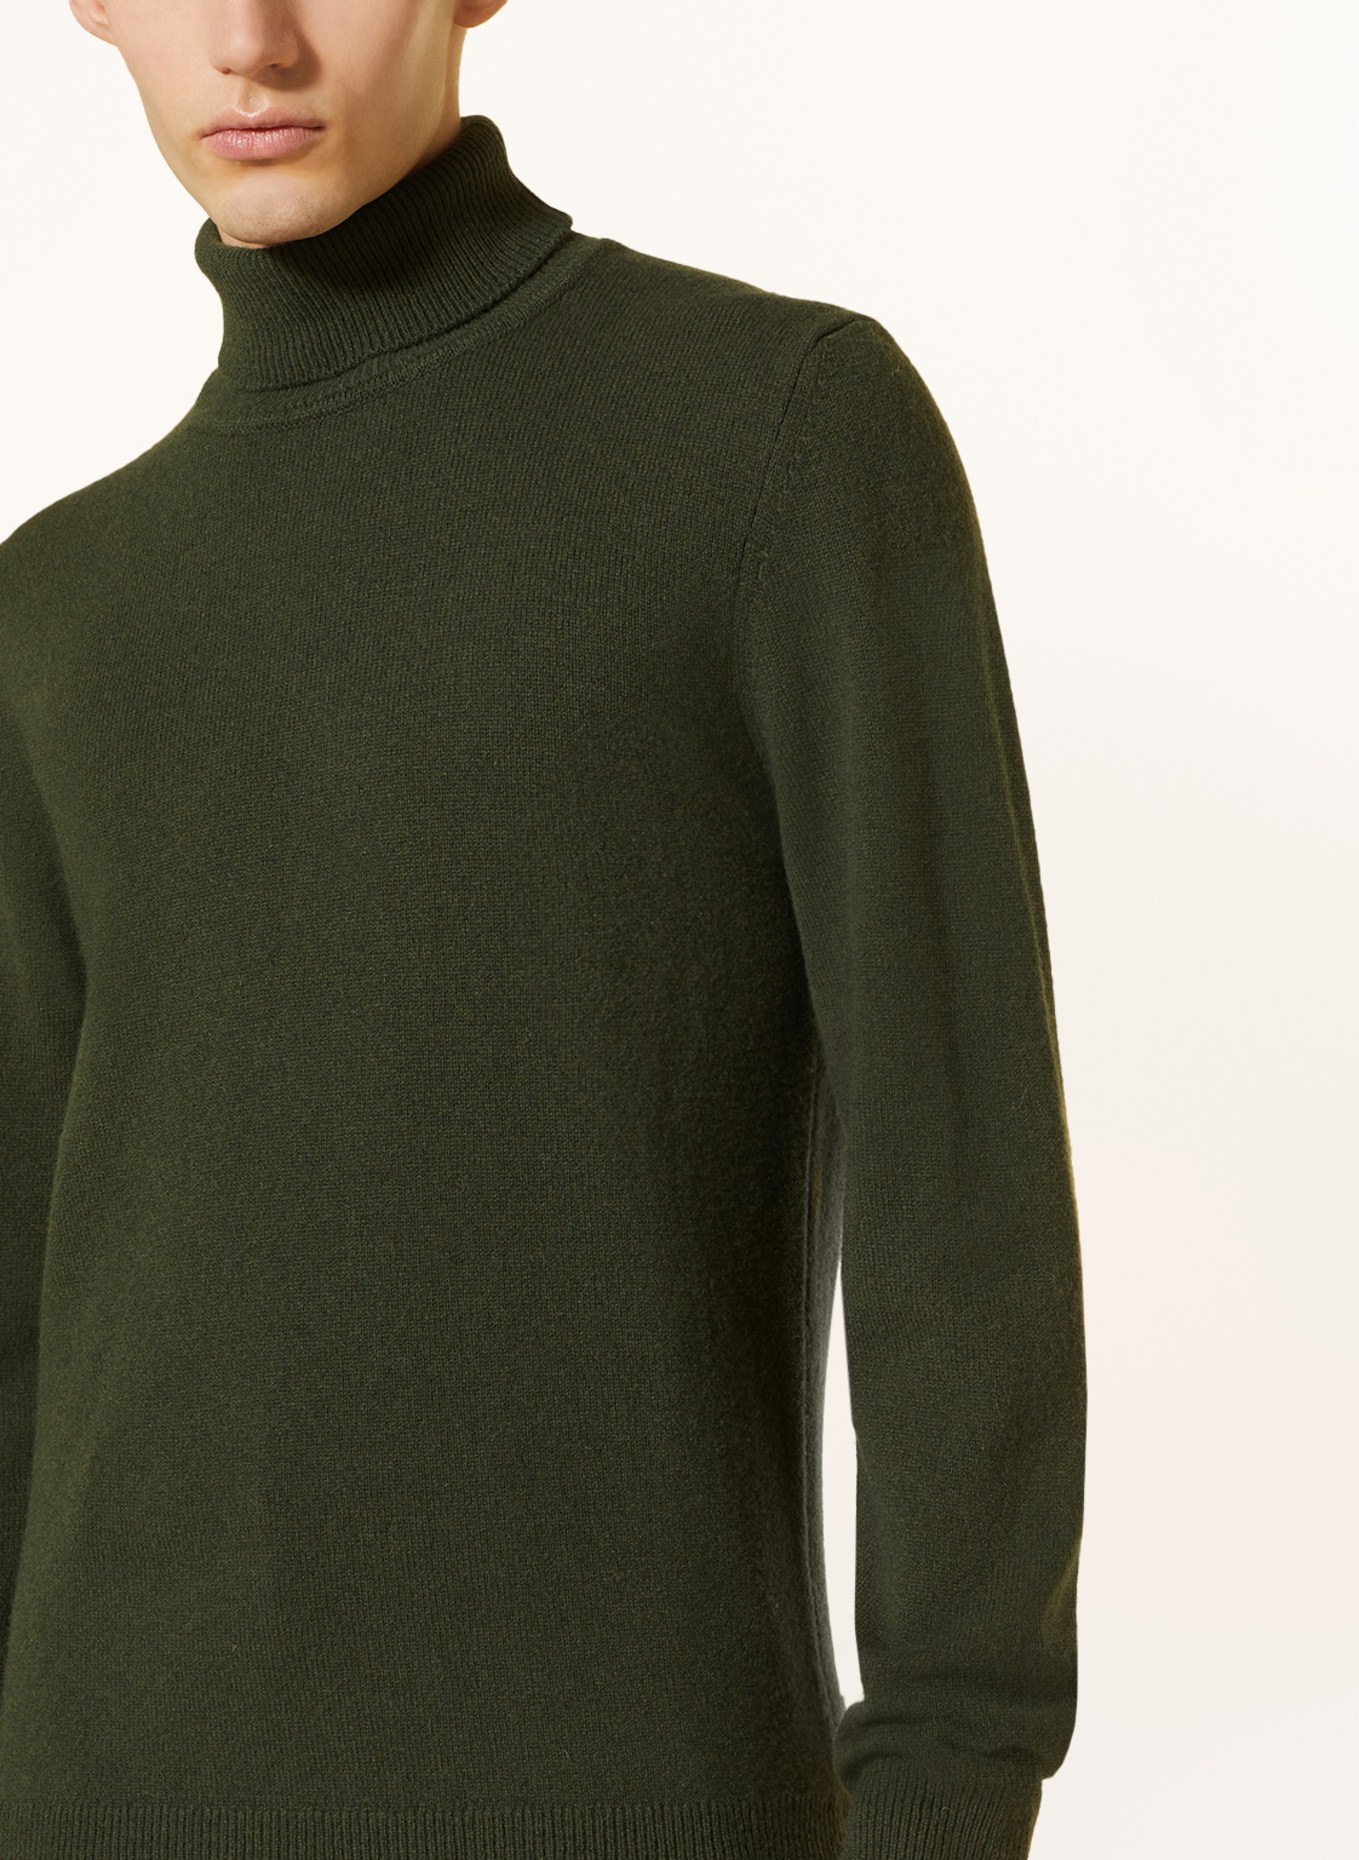 NORSE PROJECTS Turtleneck sweater KIRK made of merino wool, Color: GREEN (Image 4)